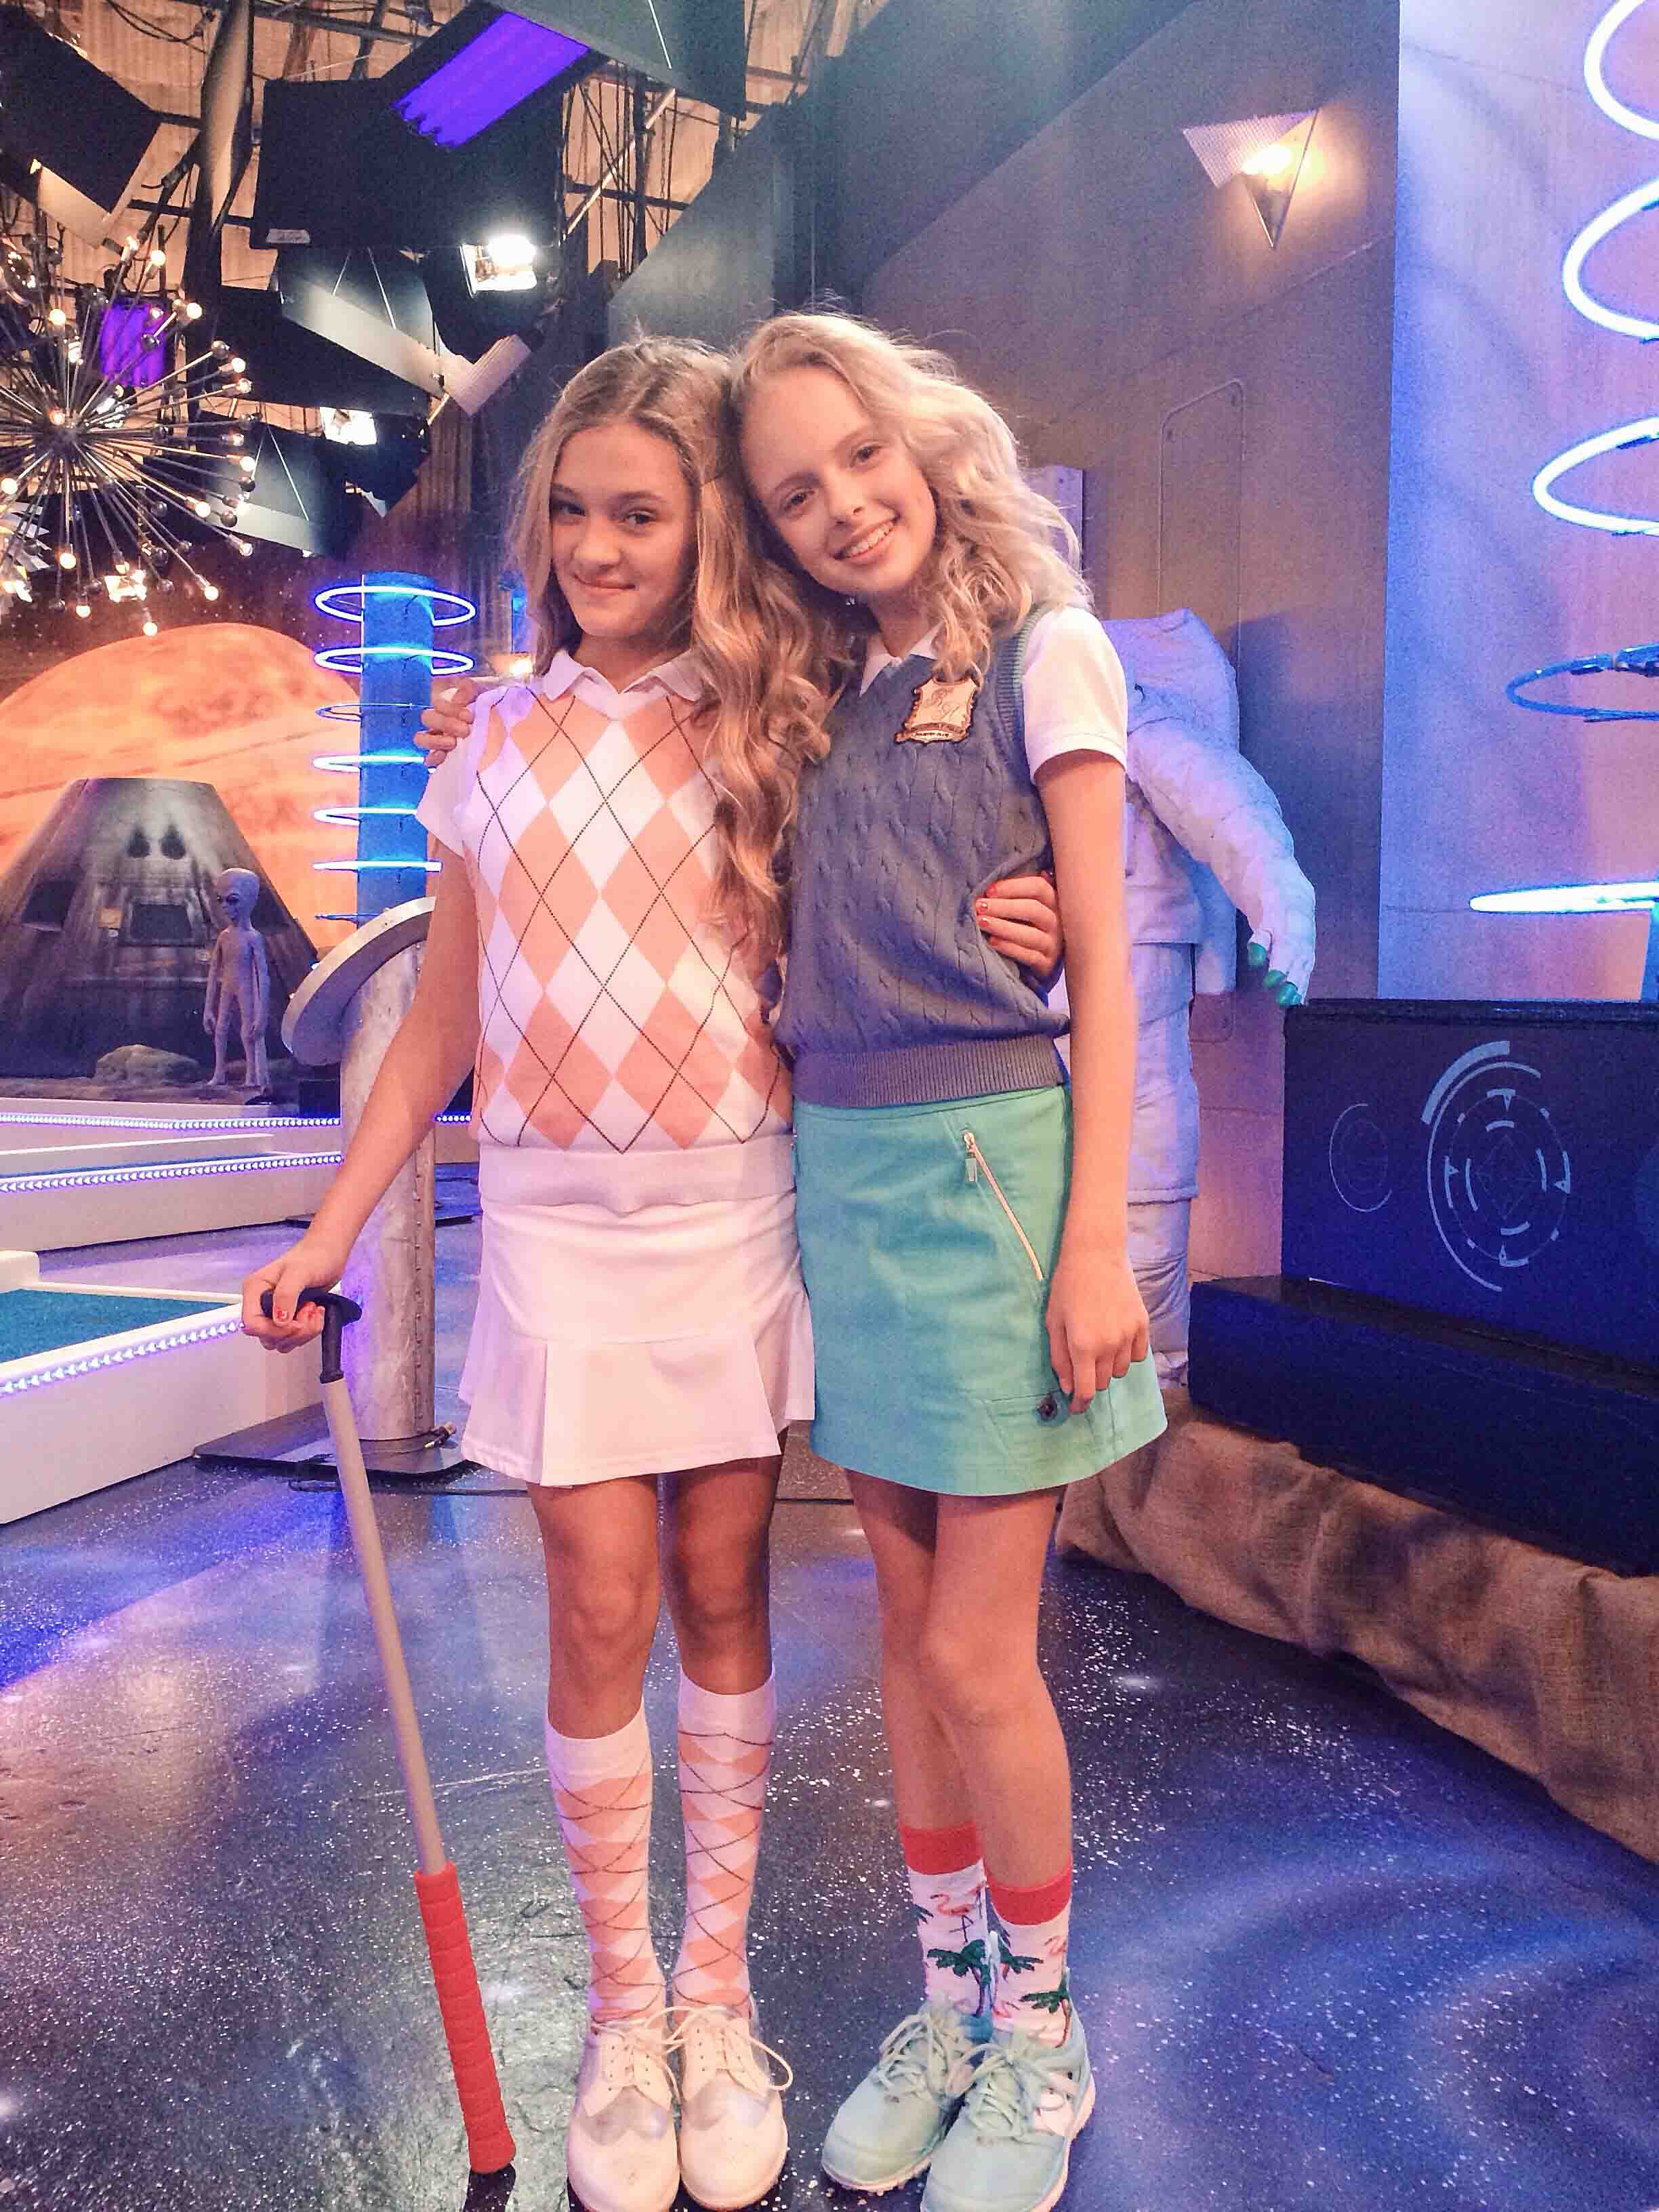 Jessica Belkin and Lizzy Greene in Nicky, Ricky, Dicky & Dawn/Episode: Quaddy-Shack,Dir.Eric Dean Seaton